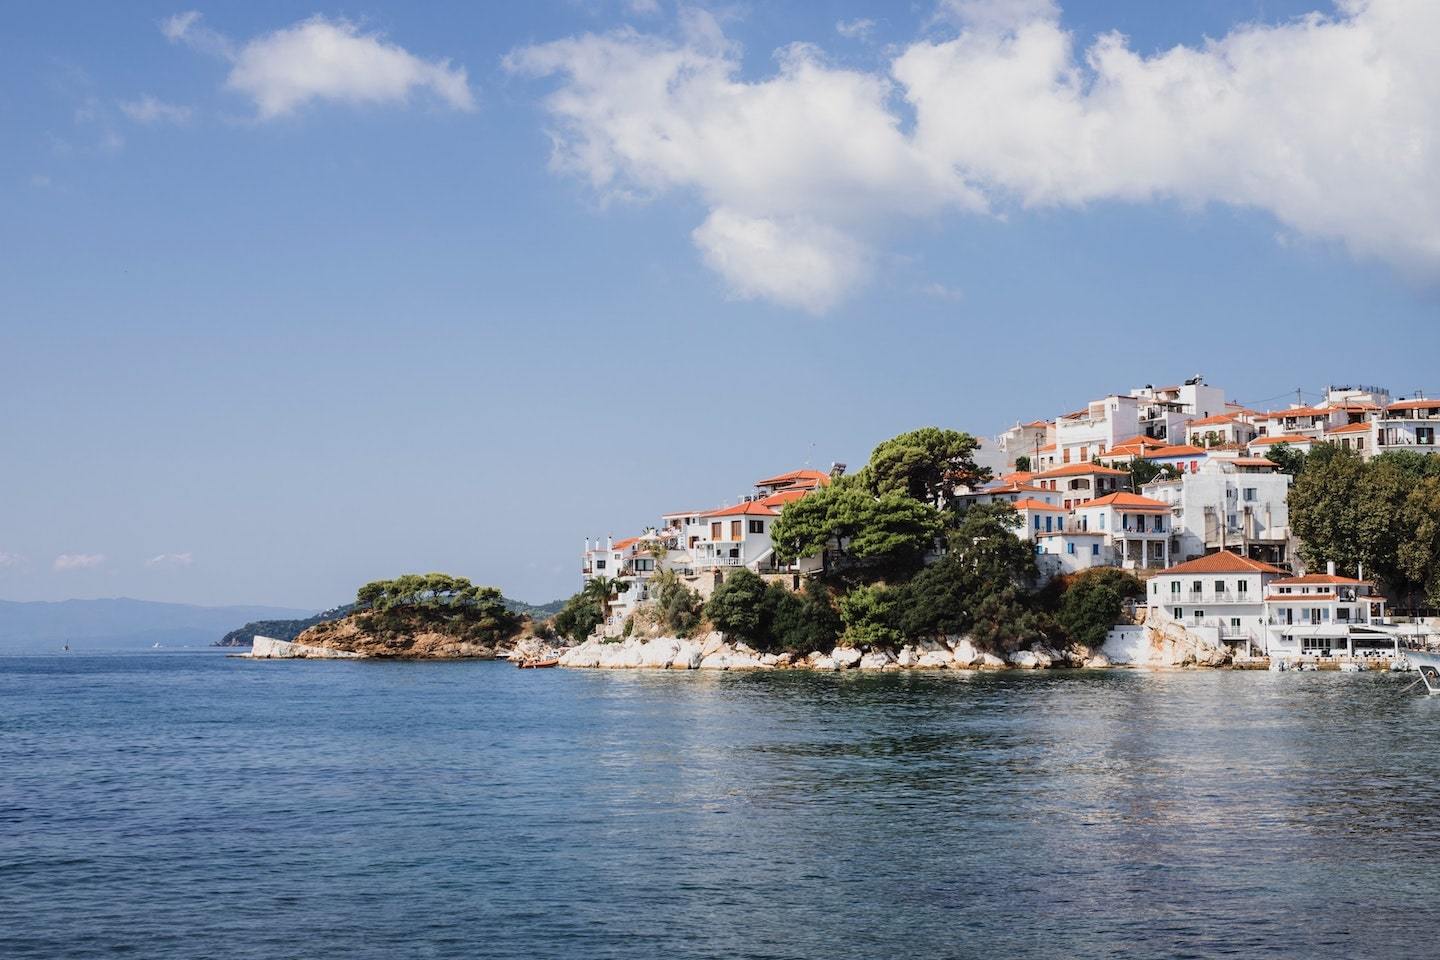 Houses sitting on a hill in front of the ocean in Skiathos, Greece